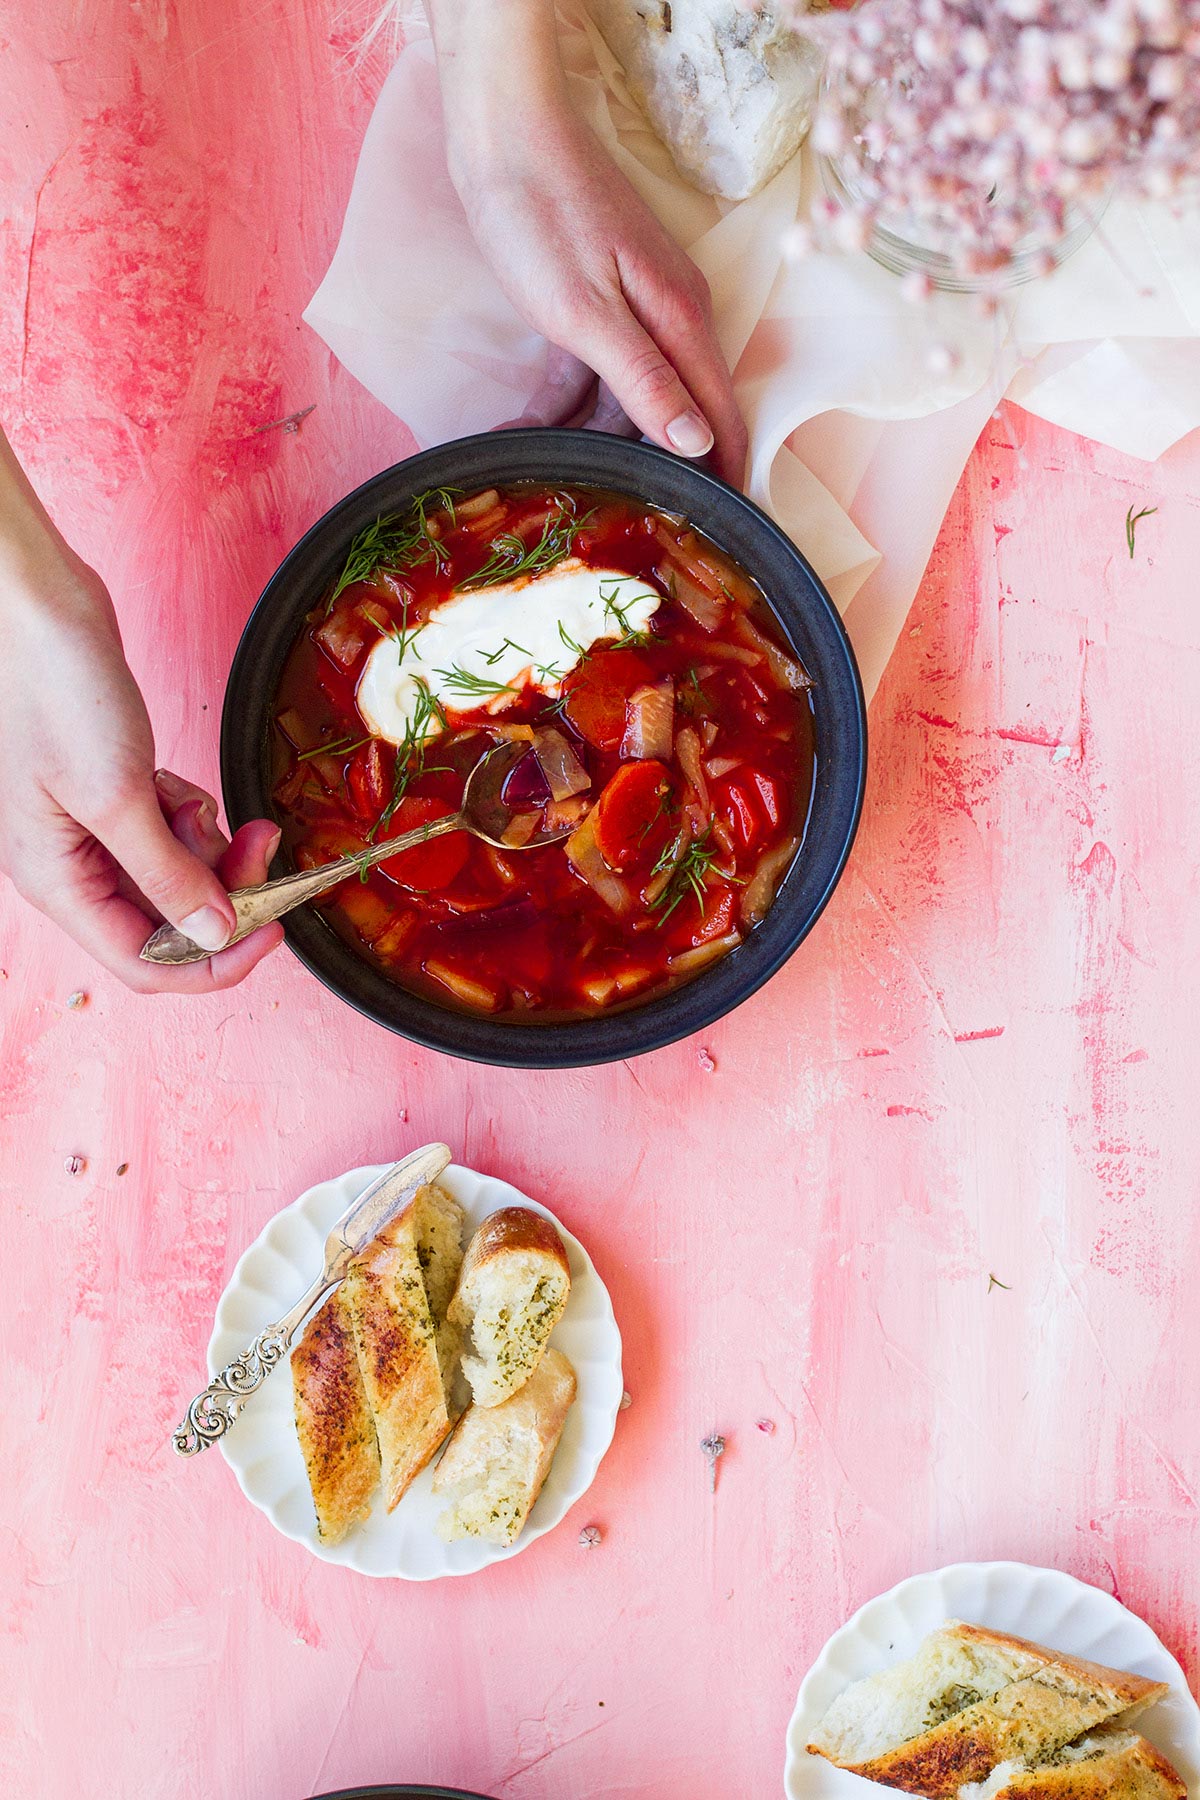 Hands holding a black bowl with bright red vegetable soup and sour cream.